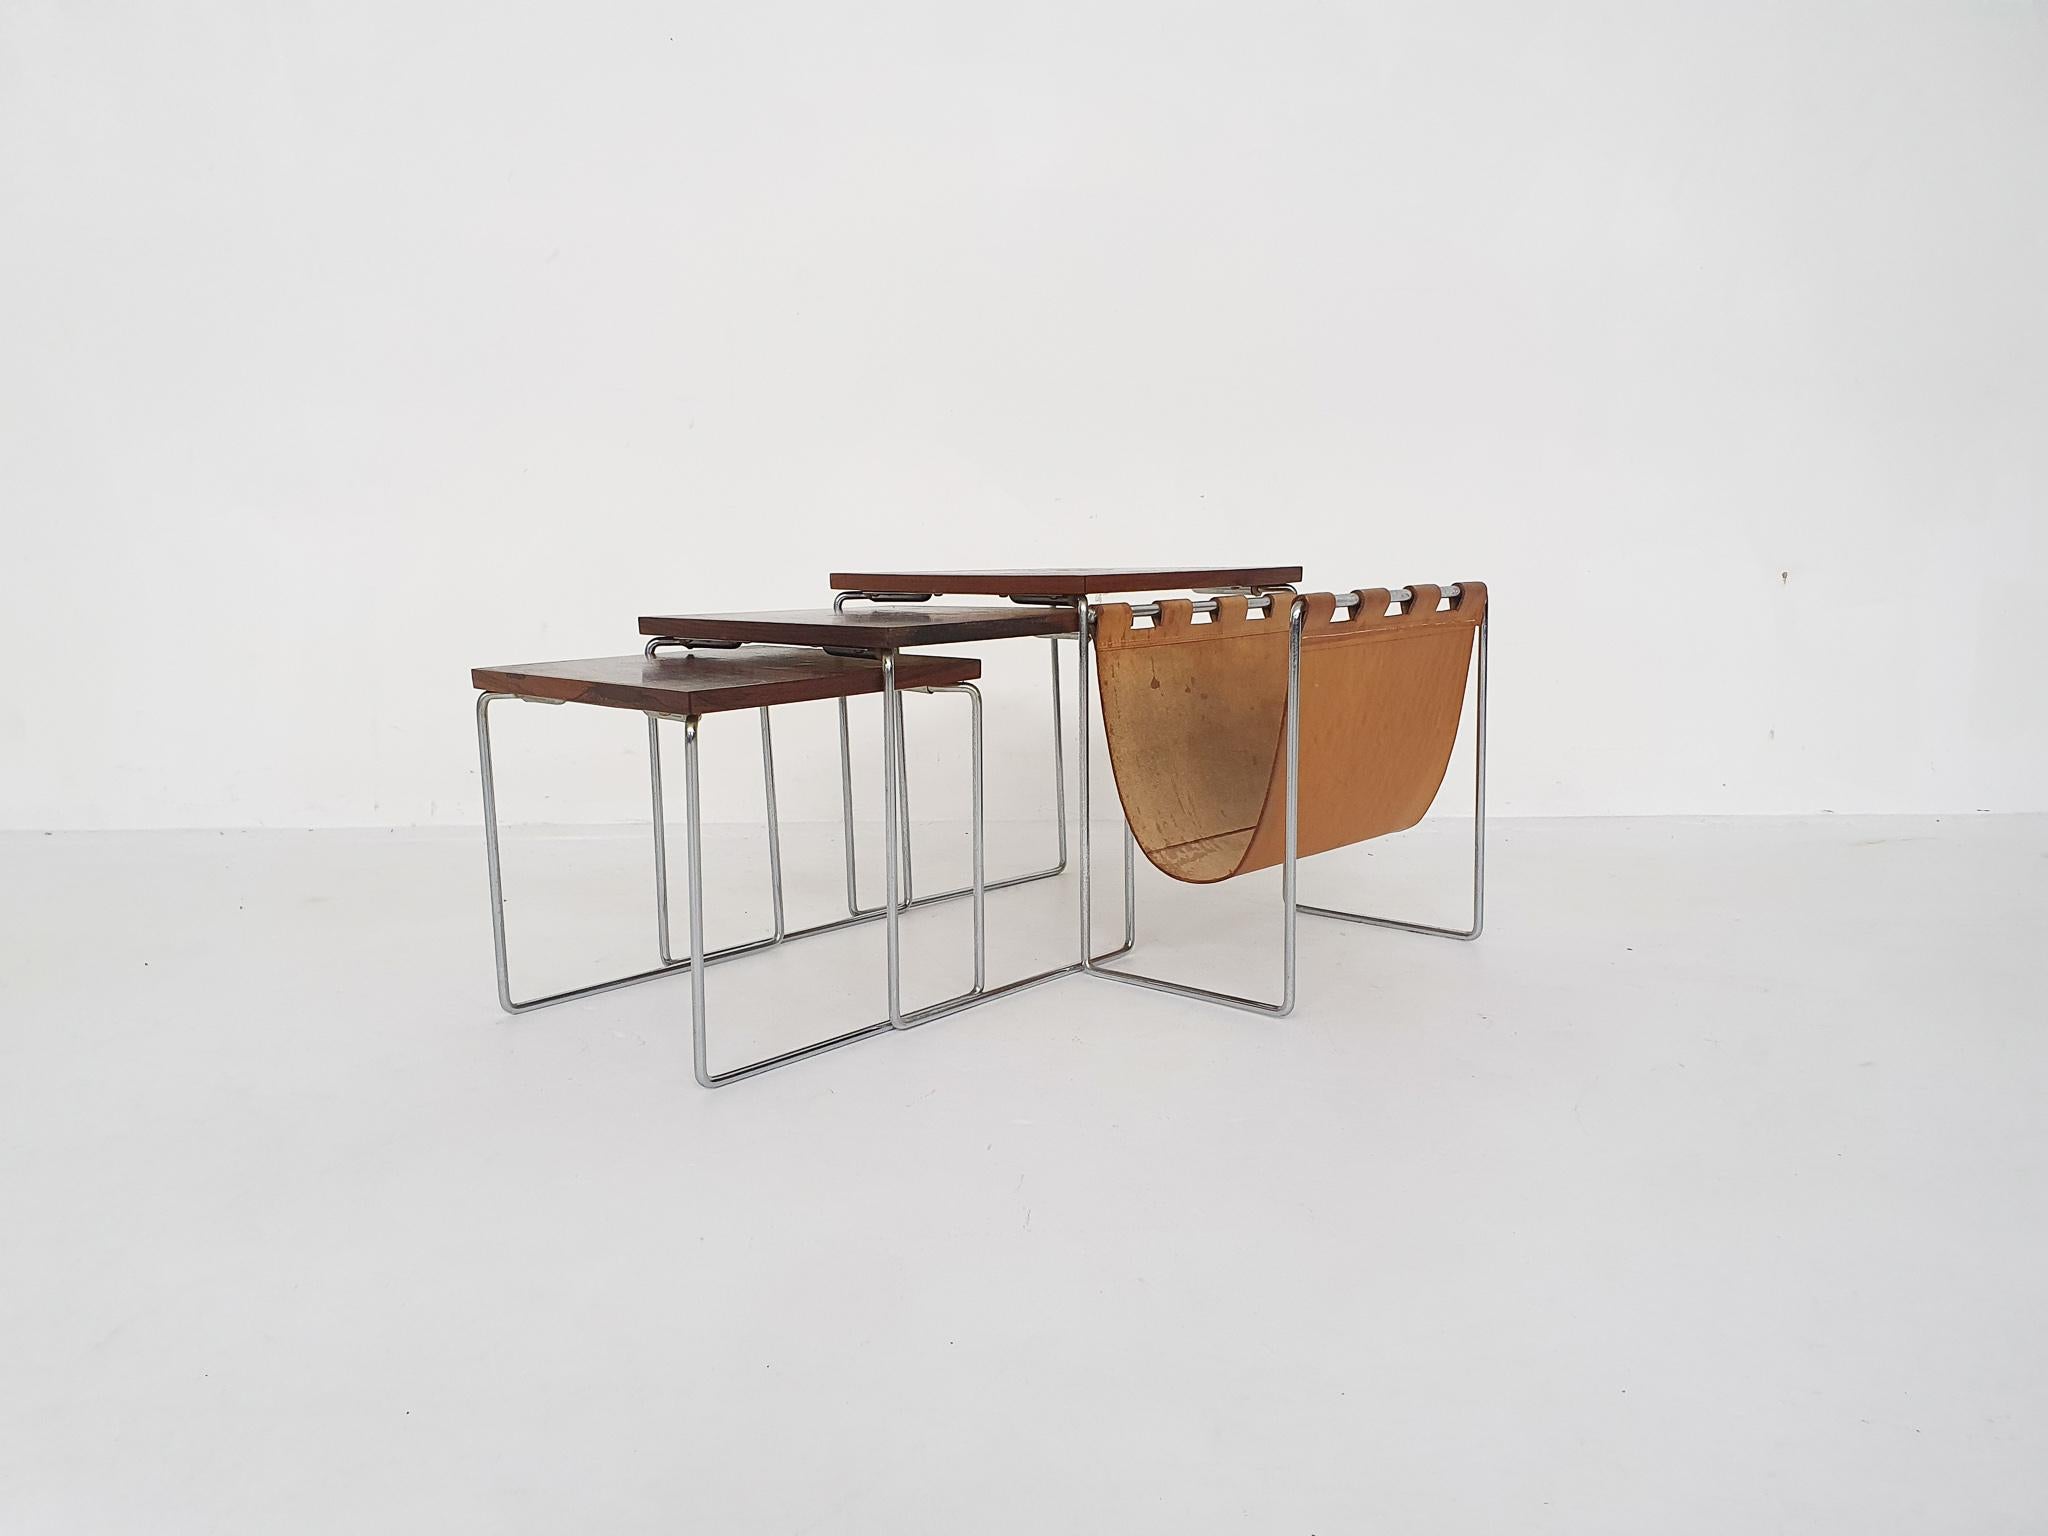 Set of three rosewood veneer and metal nesting tables. The large one has a cognac saddle leather magazine rack.
Some traces of use.
Large: 56 x 34.5 x 37cm (LxWxH)
Middle: 32.5 x 32.5 x 34cm (LxWxH)
Small: 30 x 30 x 31 cm (LxWxH).

 